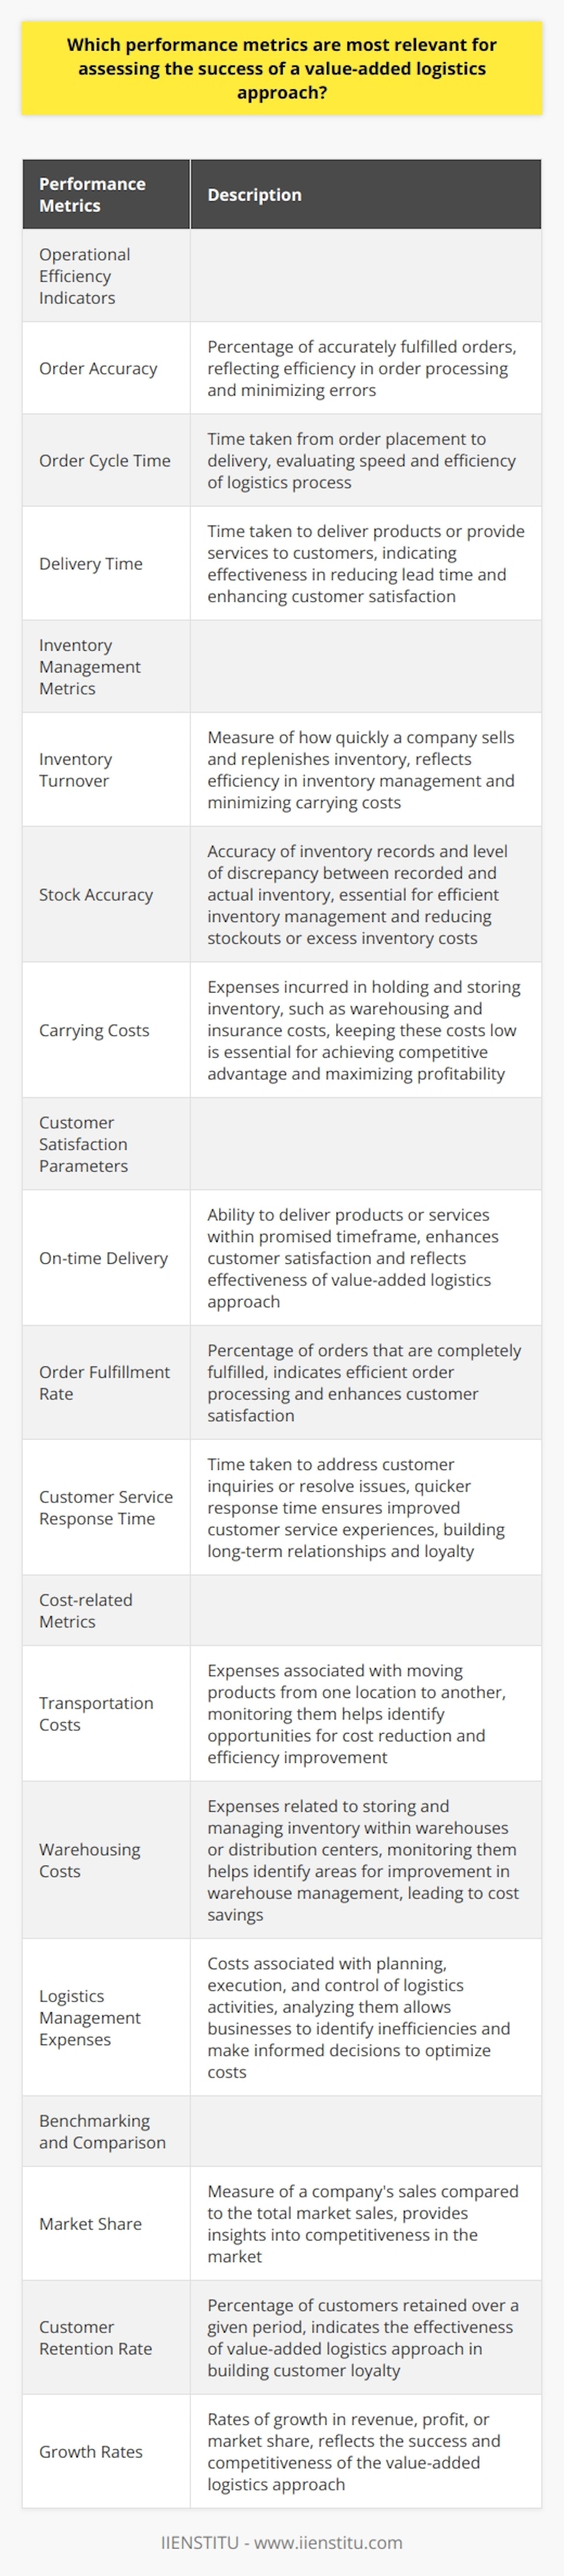 Value-added logistics refers to the process of enhancing the value of a product or service through integration of additional features or services during the logistics or supply chain process. This approach aims to improve customer satisfaction, gain a competitive advantage, and increase profitability. To assess the success of a value-added logistics approach, specific performance metrics are crucial. Below, we discuss the most relevant metrics for evaluating the effectiveness of such an approach.Operational Efficiency Indicators:Order accuracy is a critical metric for measuring the success of a value-added logistics approach. It assesses the percentage of orders that are accurately fulfilled, reflecting the efficiency of order processing and minimizing errors. A high order accuracy rate indicates that the value-added logistics strategy effectively streamlines operations and meets customer expectations.Order cycle time measures the time taken from order placement to delivery. It evaluates the speed and efficiency of the logistics process. A shorter cycle time signifies improved operational efficiency and customer responsiveness.Delivery time refers to the time taken to deliver products or provide services to customers. A shorter delivery time is indicative of an effective value-added logistics approach that reduces lead time and enhances customer satisfaction.Inventory Management Metrics:Inventory turnover measures how quickly a company sells and replenishes its inventory. It indicates the efficiency of inventory management and the ability to minimize carrying costs. A higher inventory turnover ratio indicates better management practices and a leaner operation.Stock accuracy measures the accuracy of inventory records and the level of discrepancy between recorded inventory and the actual inventory. High stock accuracy is crucial for efficient inventory management and reducing costs associated with stockouts or excess inventory.Carrying costs refer to the expenses incurred in holding and storing inventory, such as warehousing and insurance costs. Keeping these costs low is essential to achieving a competitive advantage and maximizing profitability.Customer Satisfaction Parameters:On-time delivery measures the ability of a company to deliver products or services within the promised timeframe. A high on-time delivery rate enhances customer satisfaction and reflects the effectiveness of the value-added logistics approach.Order fulfillment rate assesses the percentage of orders that are completely fulfilled. A high fulfillment rate indicates efficient order processing and enhances customer satisfaction.Customer service response time measures the time taken to address customer inquiries or resolve issues. A quicker response time ensures improved customer service experiences, building long-term relationships and loyalty.Cost-related Metrics:Transportation costs include expenses associated with moving products from one location to another. Monitoring transportation costs helps identify opportunities for cost reduction and efficiency improvement in the value-added logistics process.Warehousing costs consist of expenses related to storing and managing inventory within warehouses or distribution centers. Monitoring these costs helps identify areas for improvement in warehouse management, leading to cost savings.Logistics management expenses encompass the costs associated with the planning, execution, and control of logistics activities. Analyzing these costs allows businesses to identify inefficiencies and make informed decisions to optimize costs.Benchmarking and Comparison:Benchmarking performance against industry standards and competitors is crucial for understanding how well a company is performing in relation to its peers. Metrics such as market share, customer retention rate, and growth rates provide insights into the effectiveness of the value-added logistics approach and its competitiveness in the market.In conclusion, a successful value-added logistics approach can be evaluated by monitoring various performance metrics. Operational efficiency indicators, inventory management metrics, customer satisfaction parameters, cost-related metrics, and benchmarking provide a comprehensive assessment of the approach's success. By analyzing these metrics, companies can identify areas for improvement, make informed decisions, and continuously enhance their value-added logistics strategy.